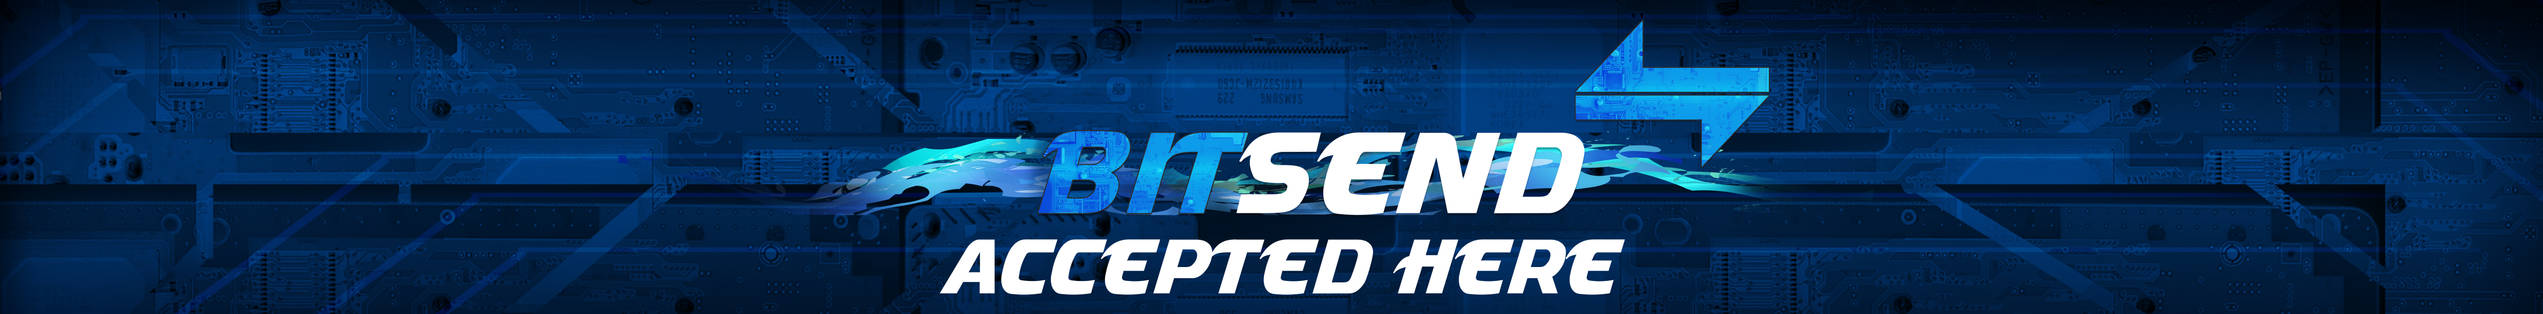 Bitsend2 Accepted Here 728